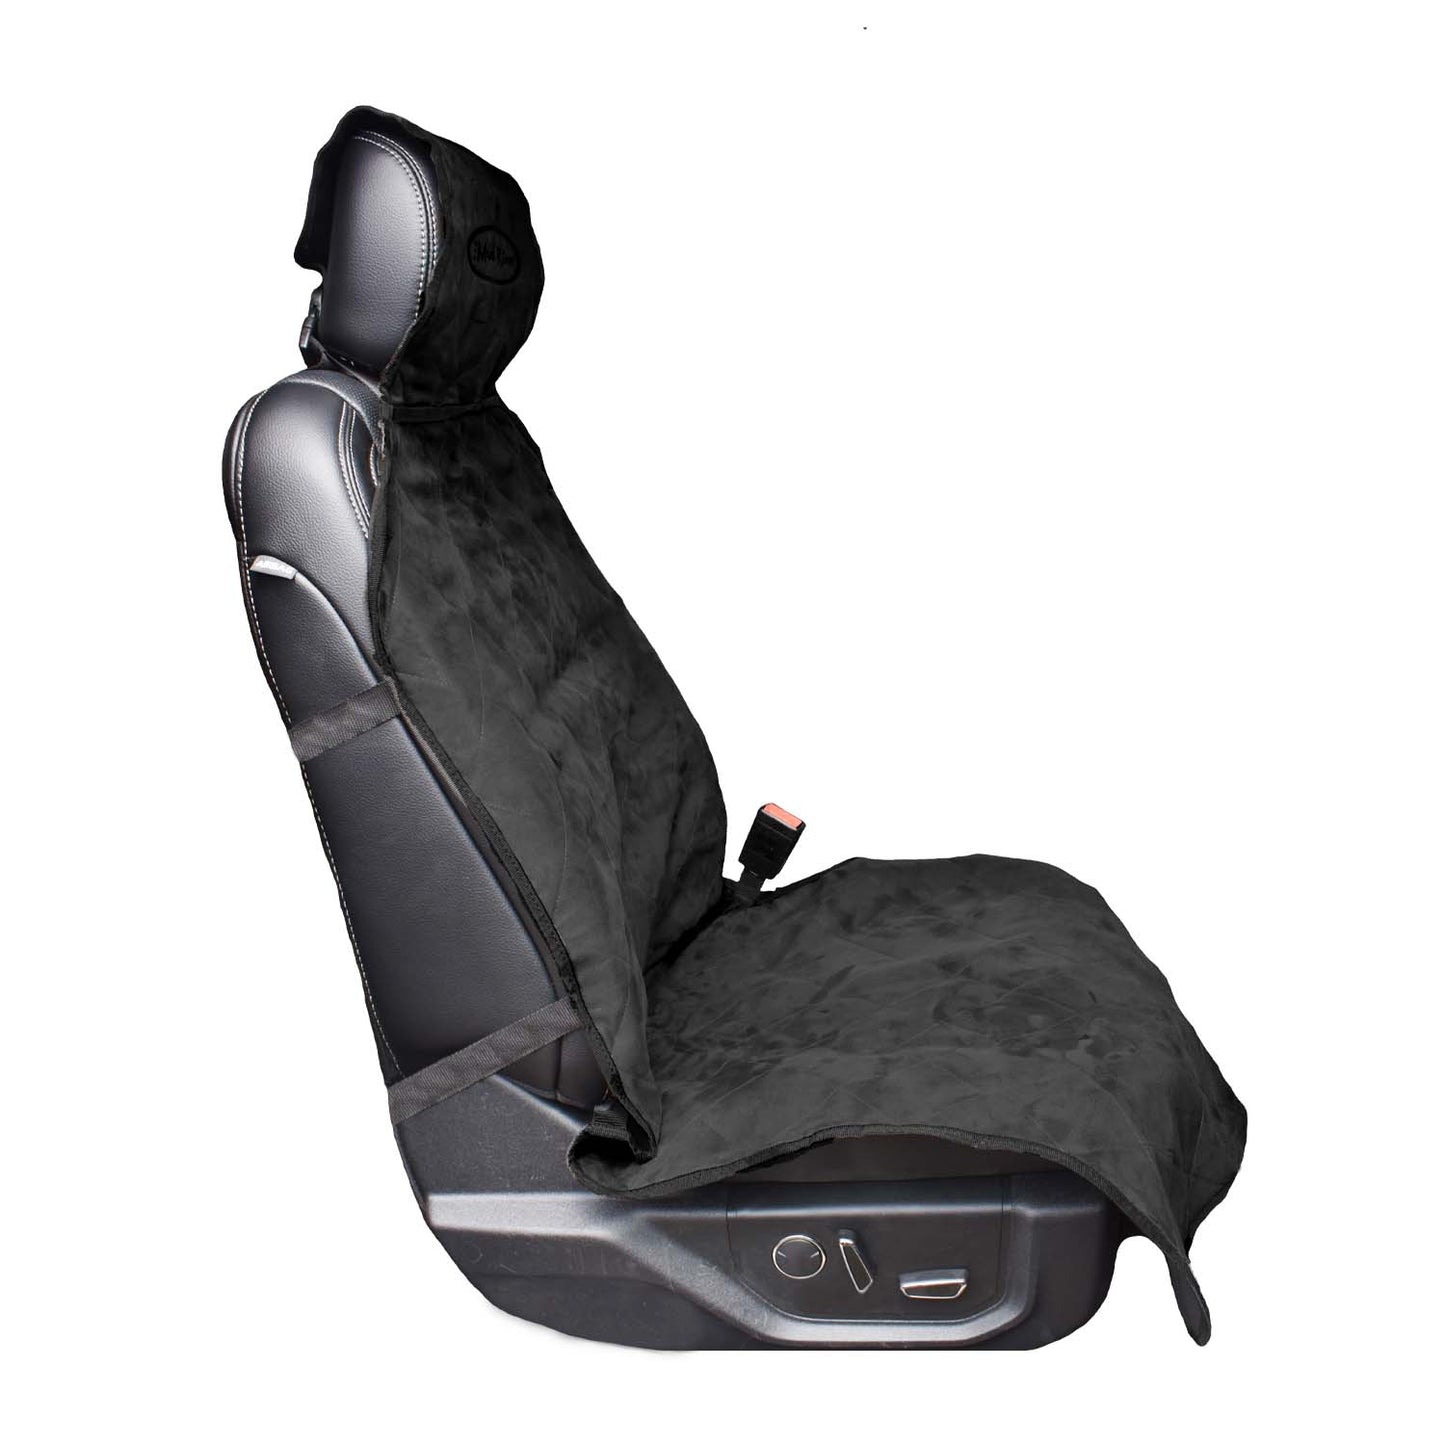 Boyt - Mud River Fitted Shotgun Seat Cover (New Material)